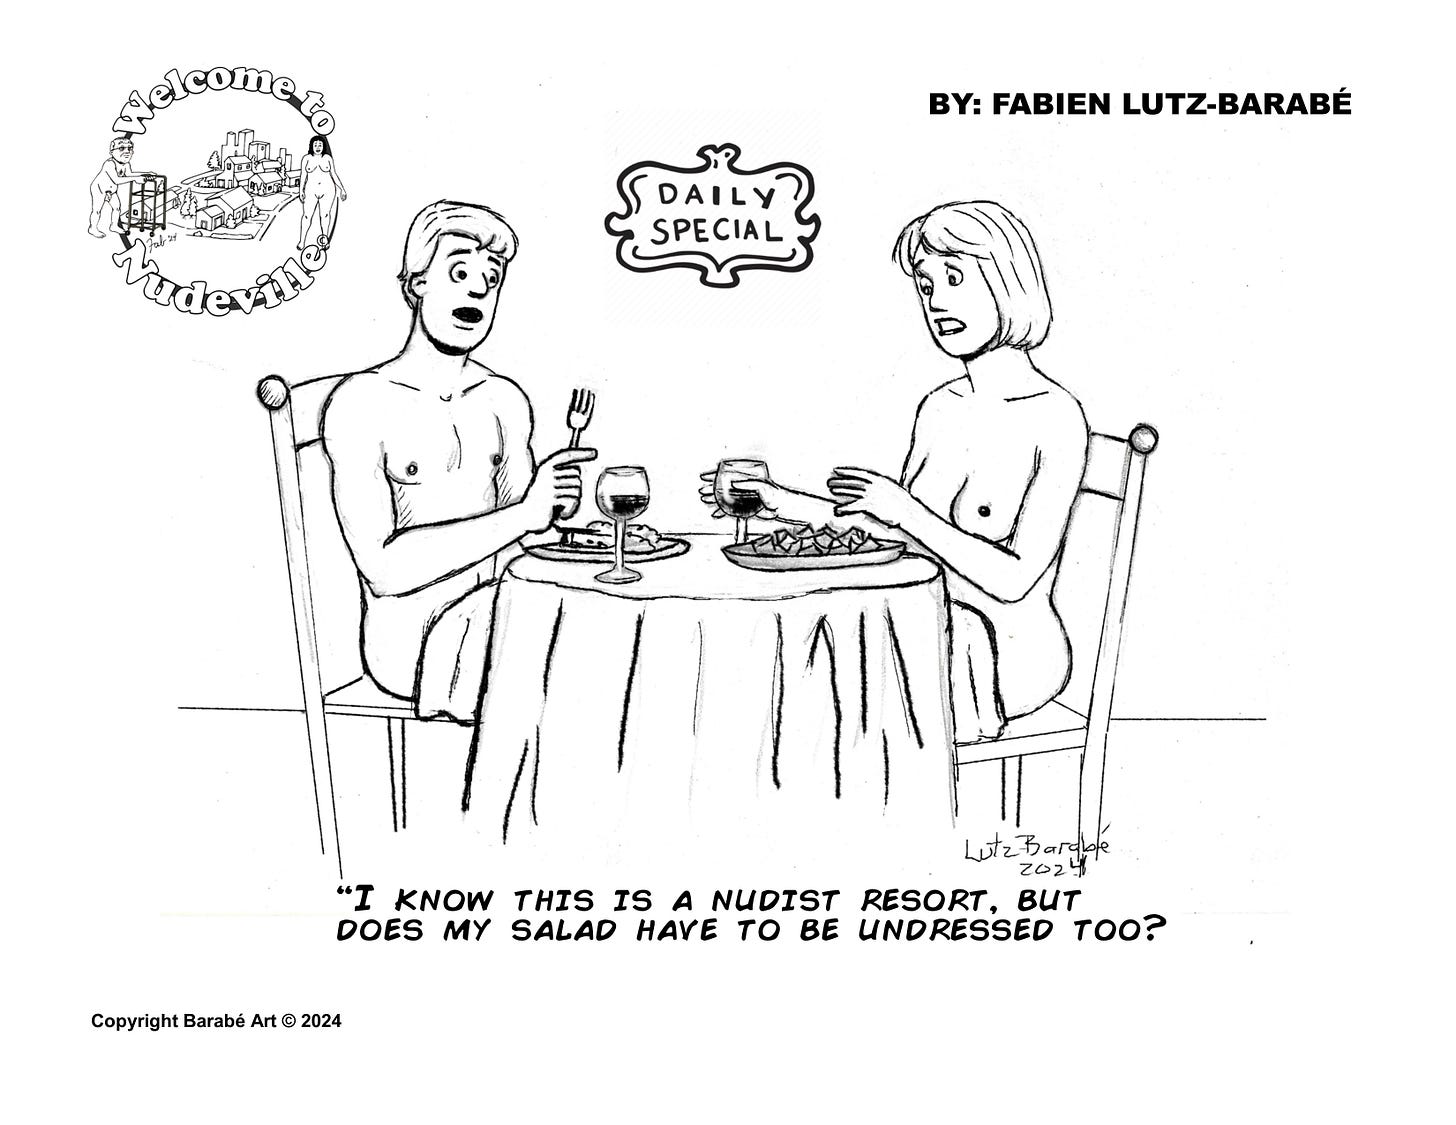 Welcome to Nudeville byt Fabien Lutz Barabé, "Daily Special". Single panel. A man and woman sit at a dining table, looking a little shocked. Caption: "I know this is a nudist resort, but does my sadal have to be undressed too?"